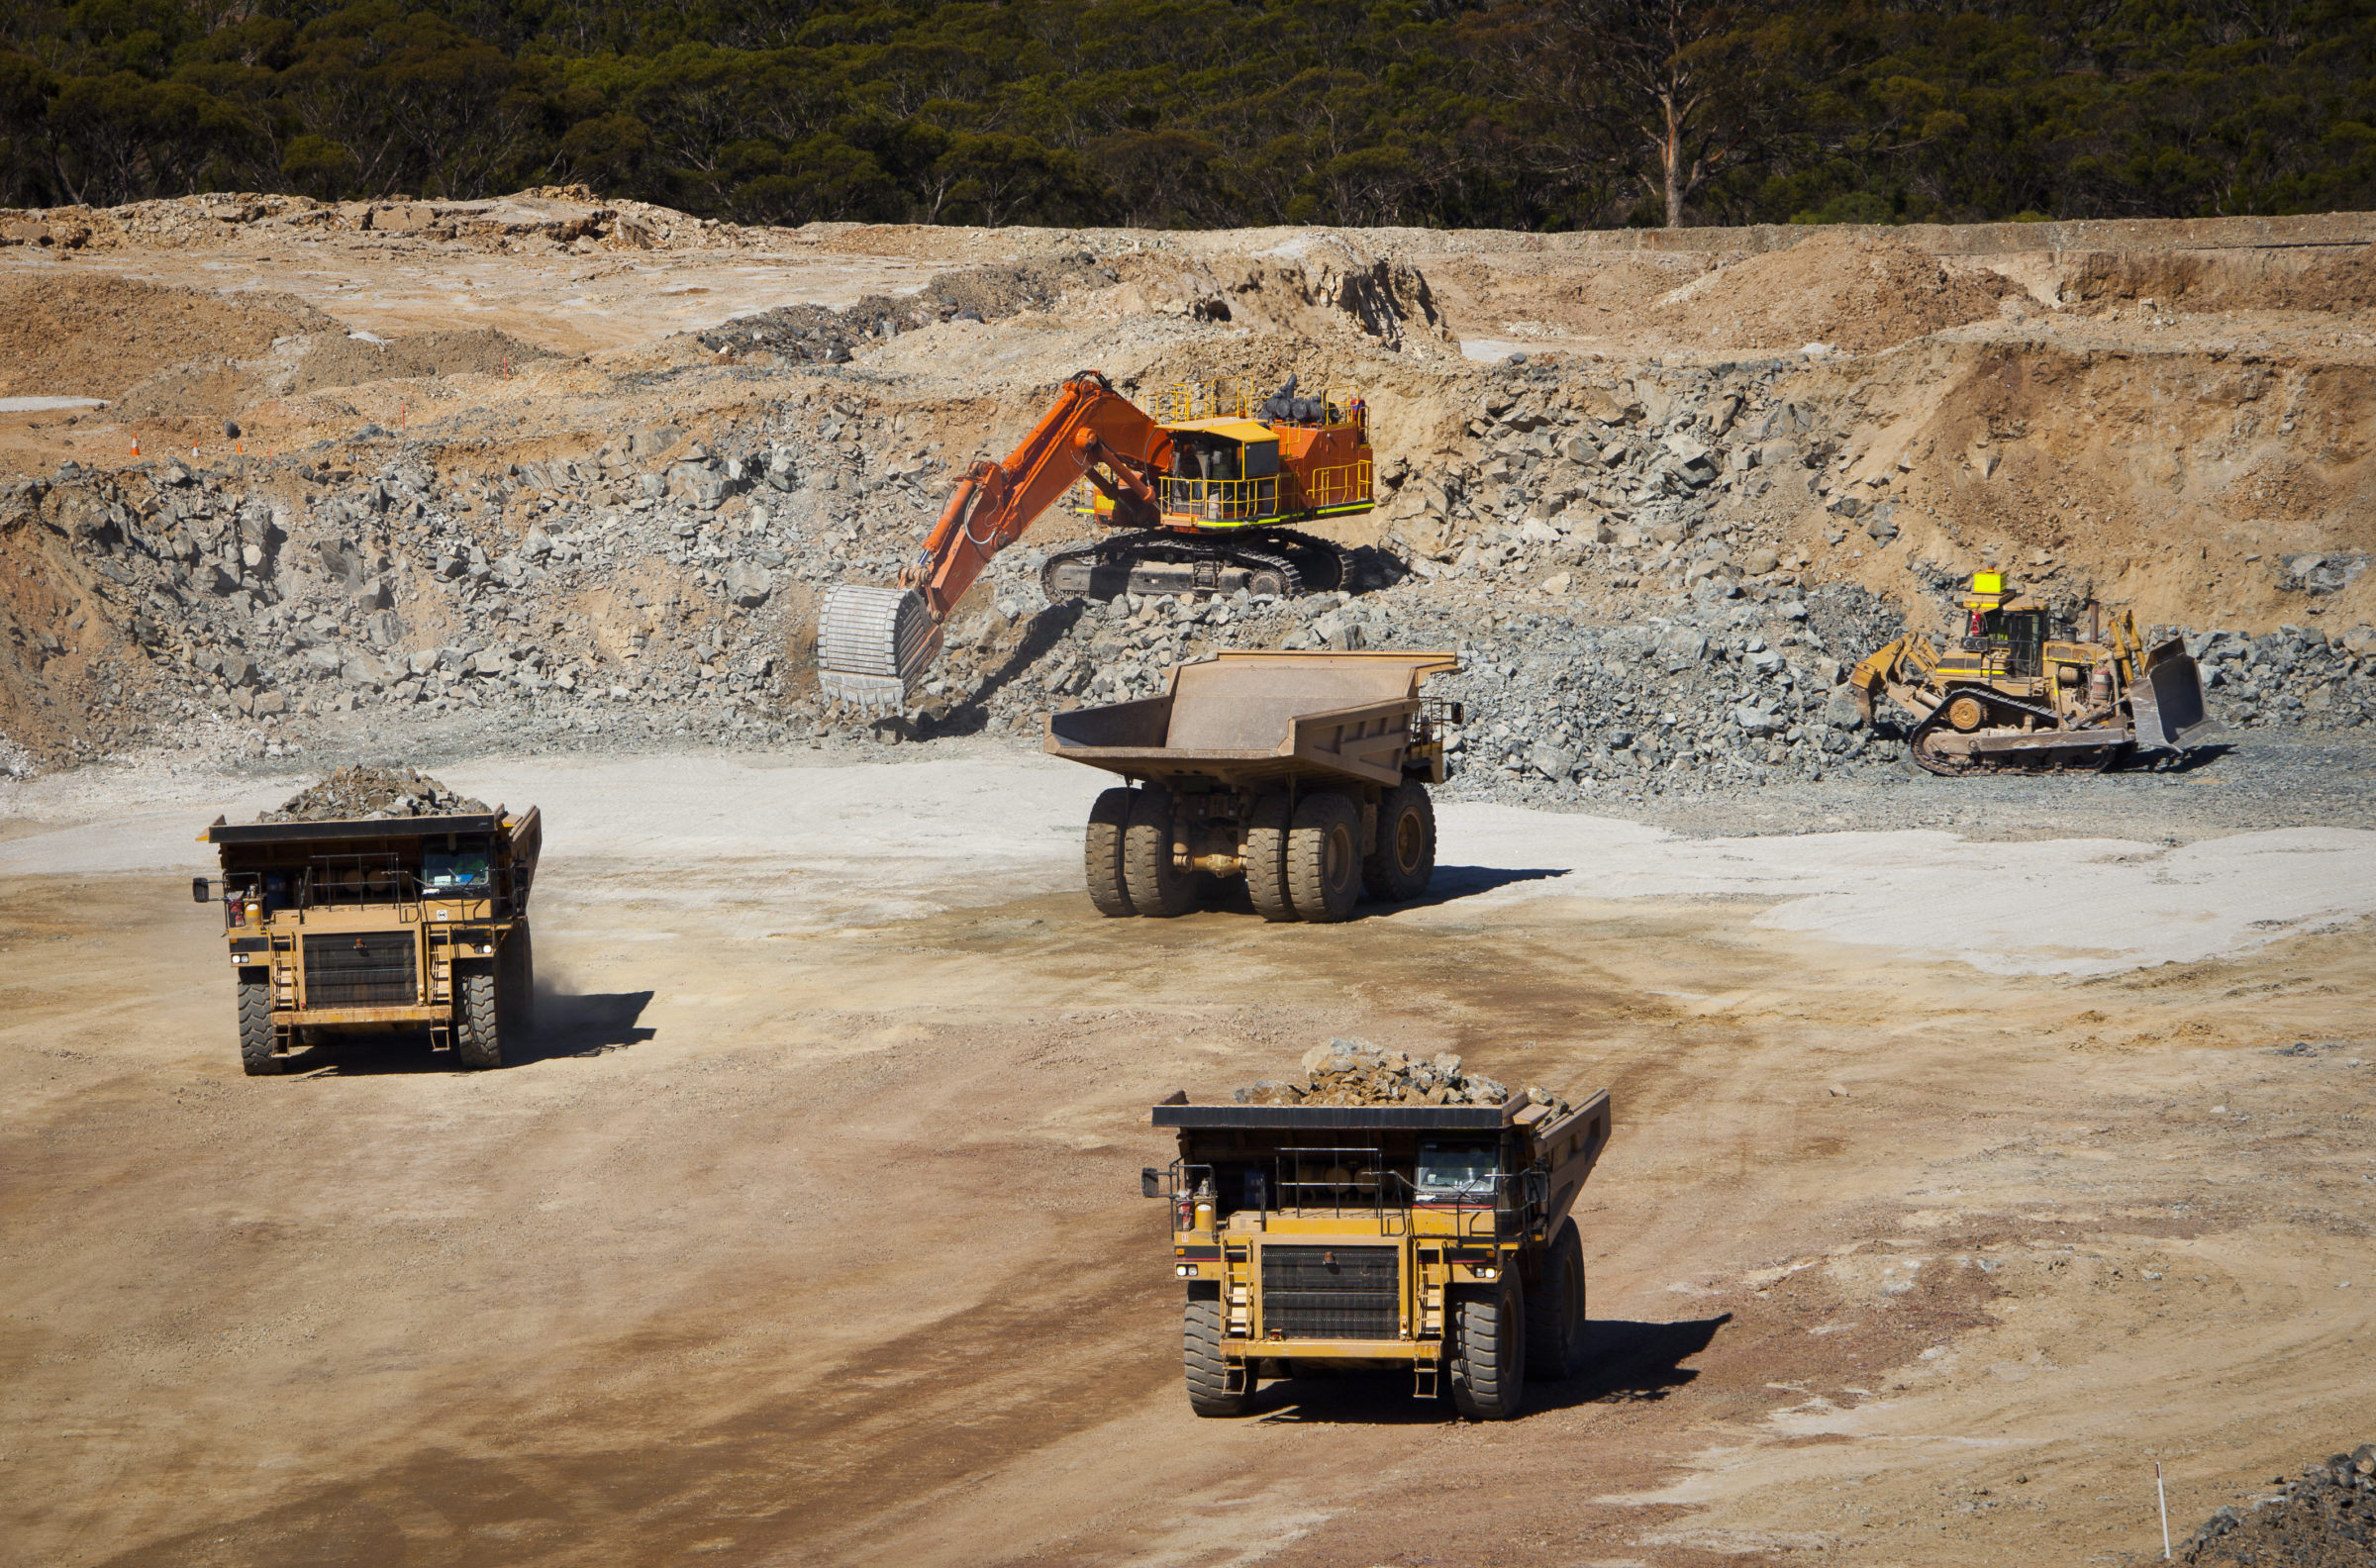 Large yellow trucks used in modern mine Western Australia. Bulldozer moves rock towards digger which fills trucks which transport ore from the open cast mine.